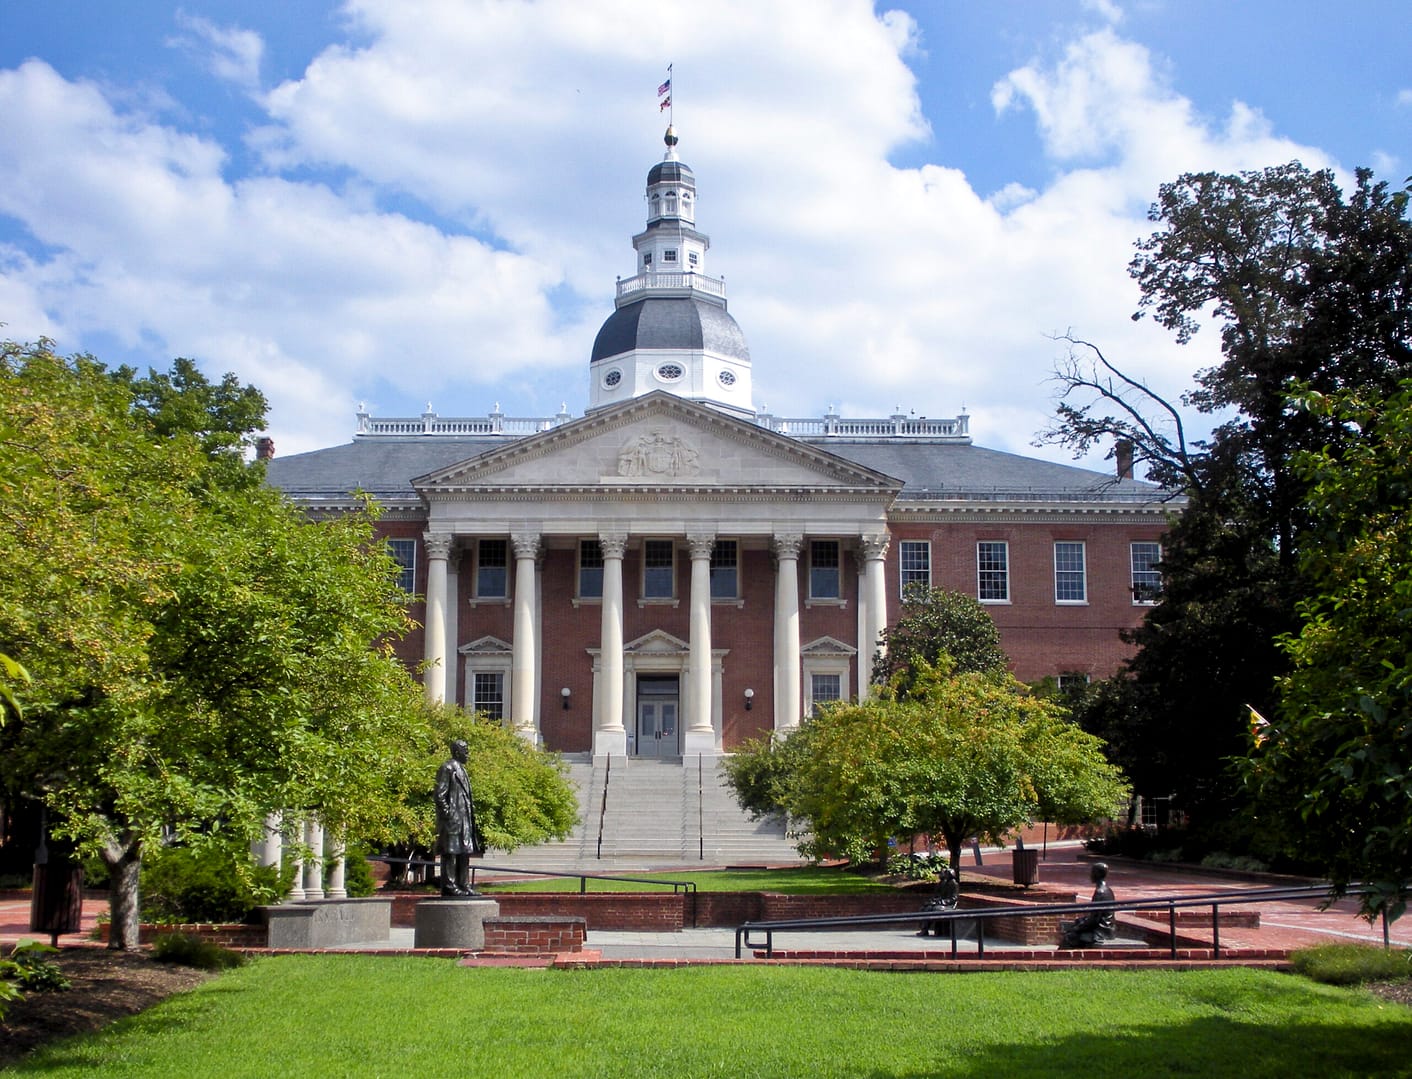 Photo of the Maryland State House